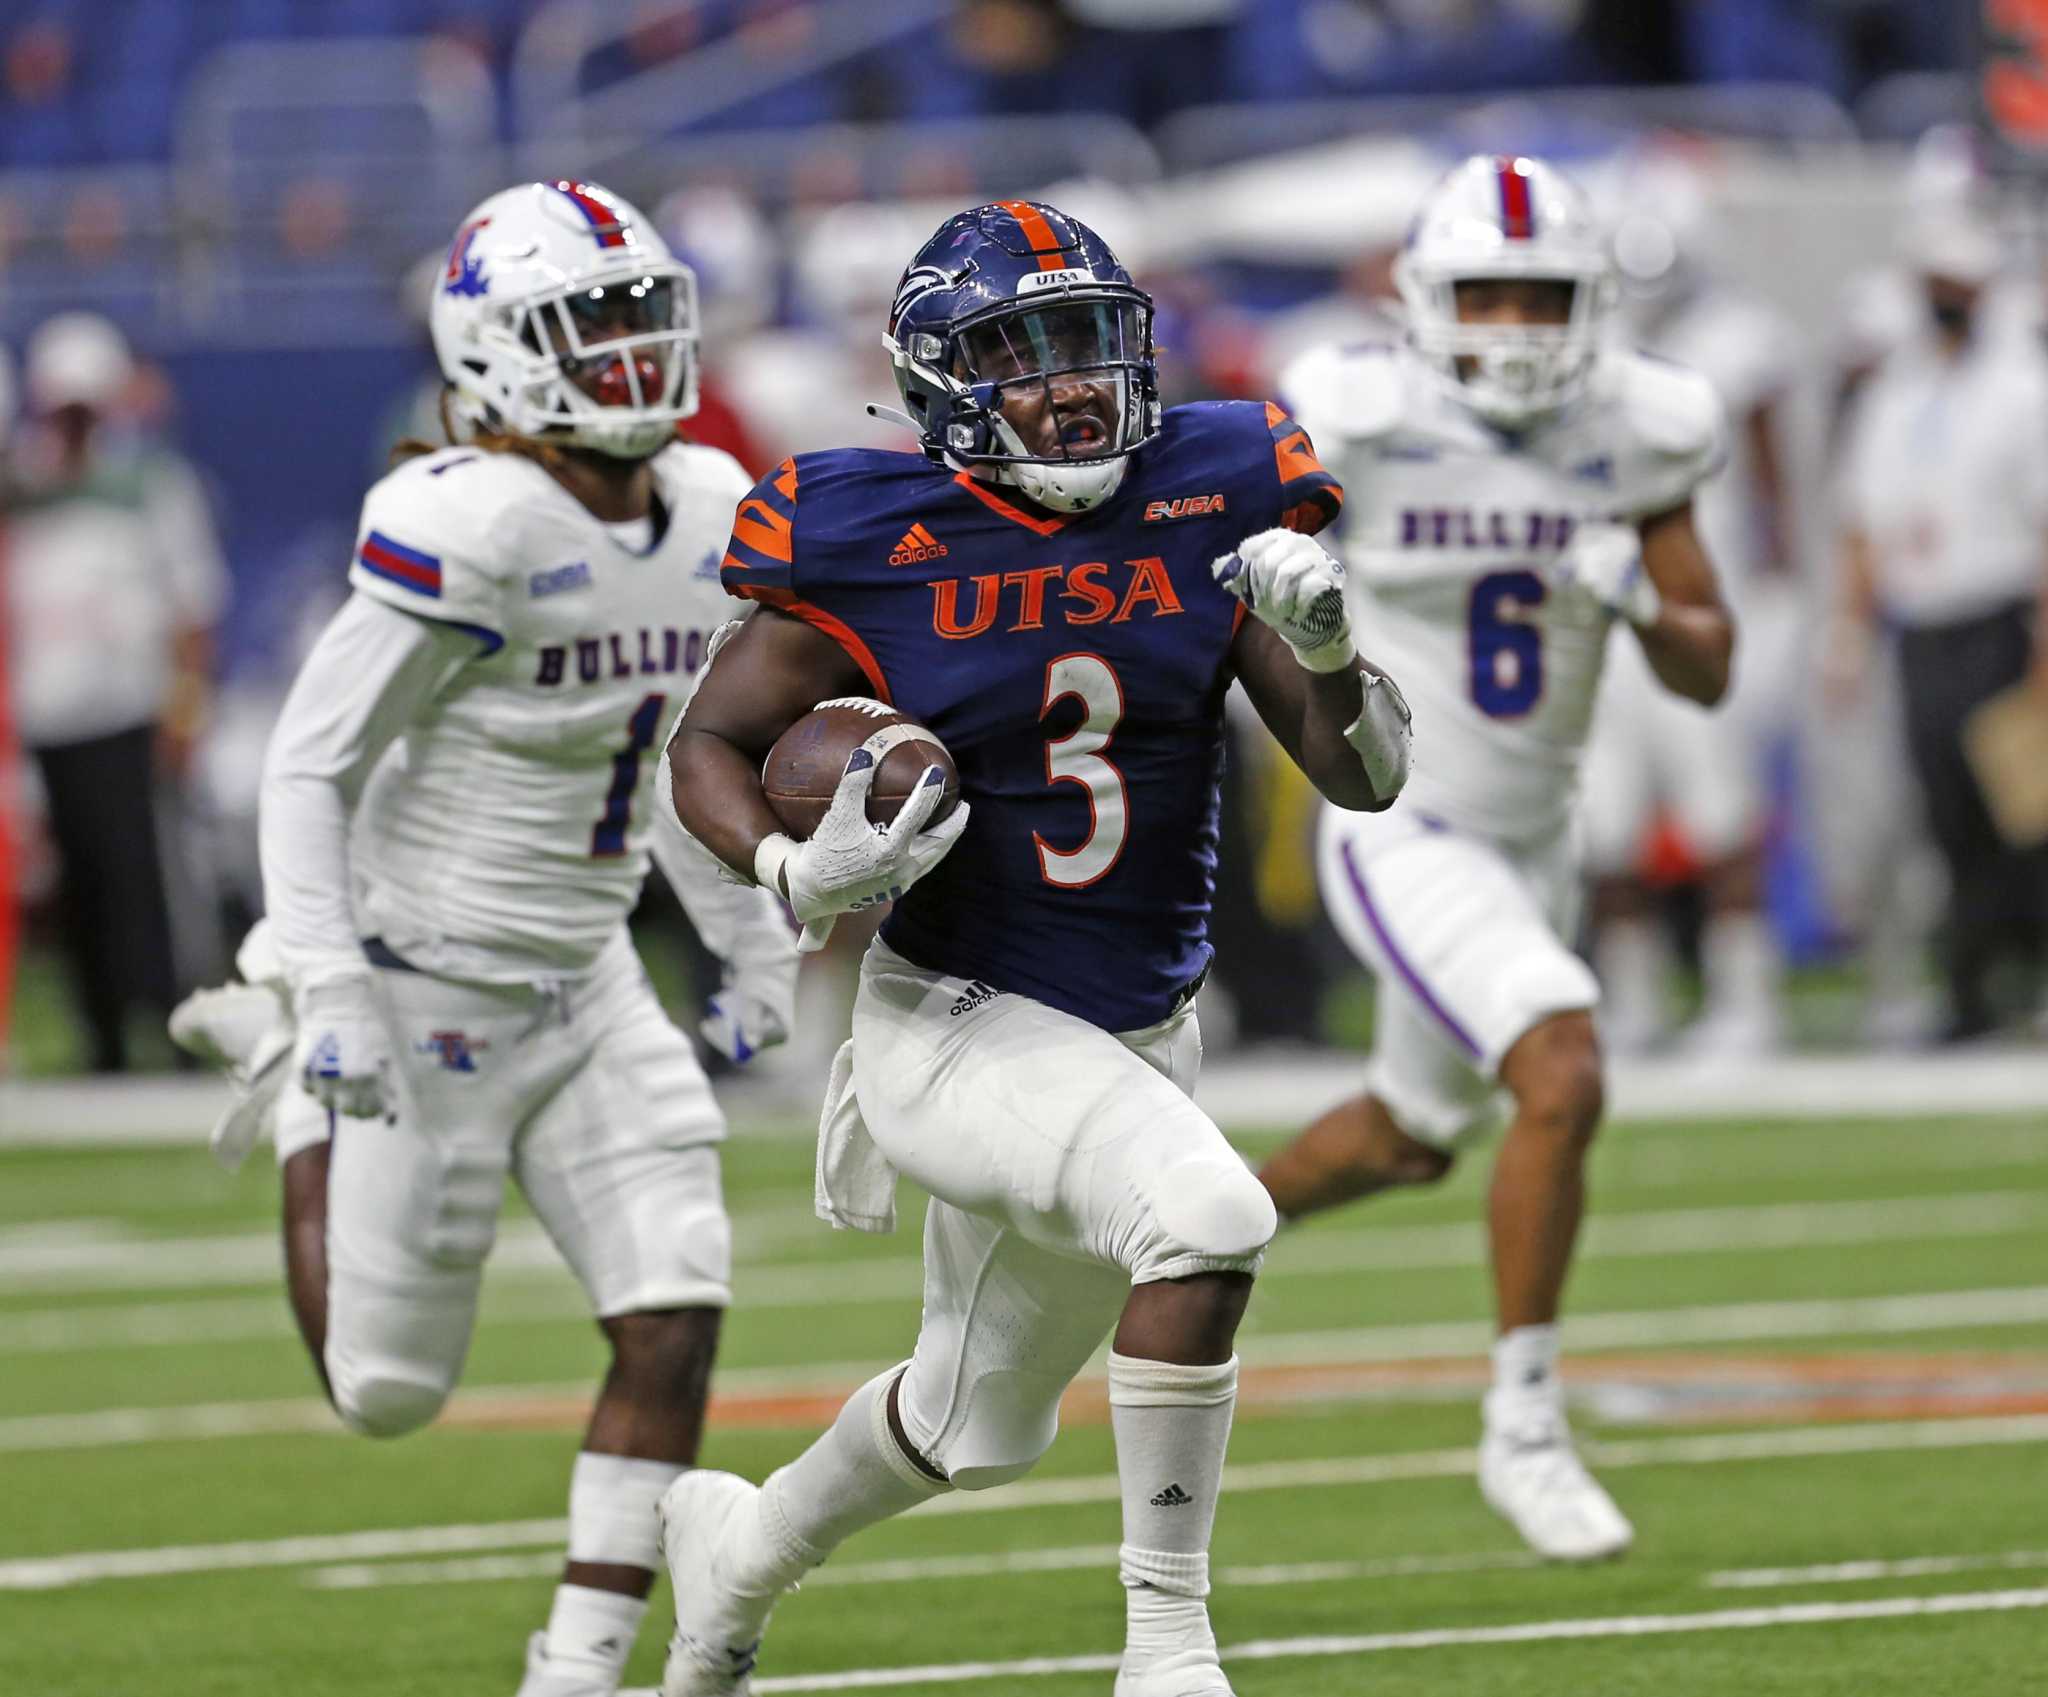 UTSA football standout Sincere McCormick will declare for the NFL